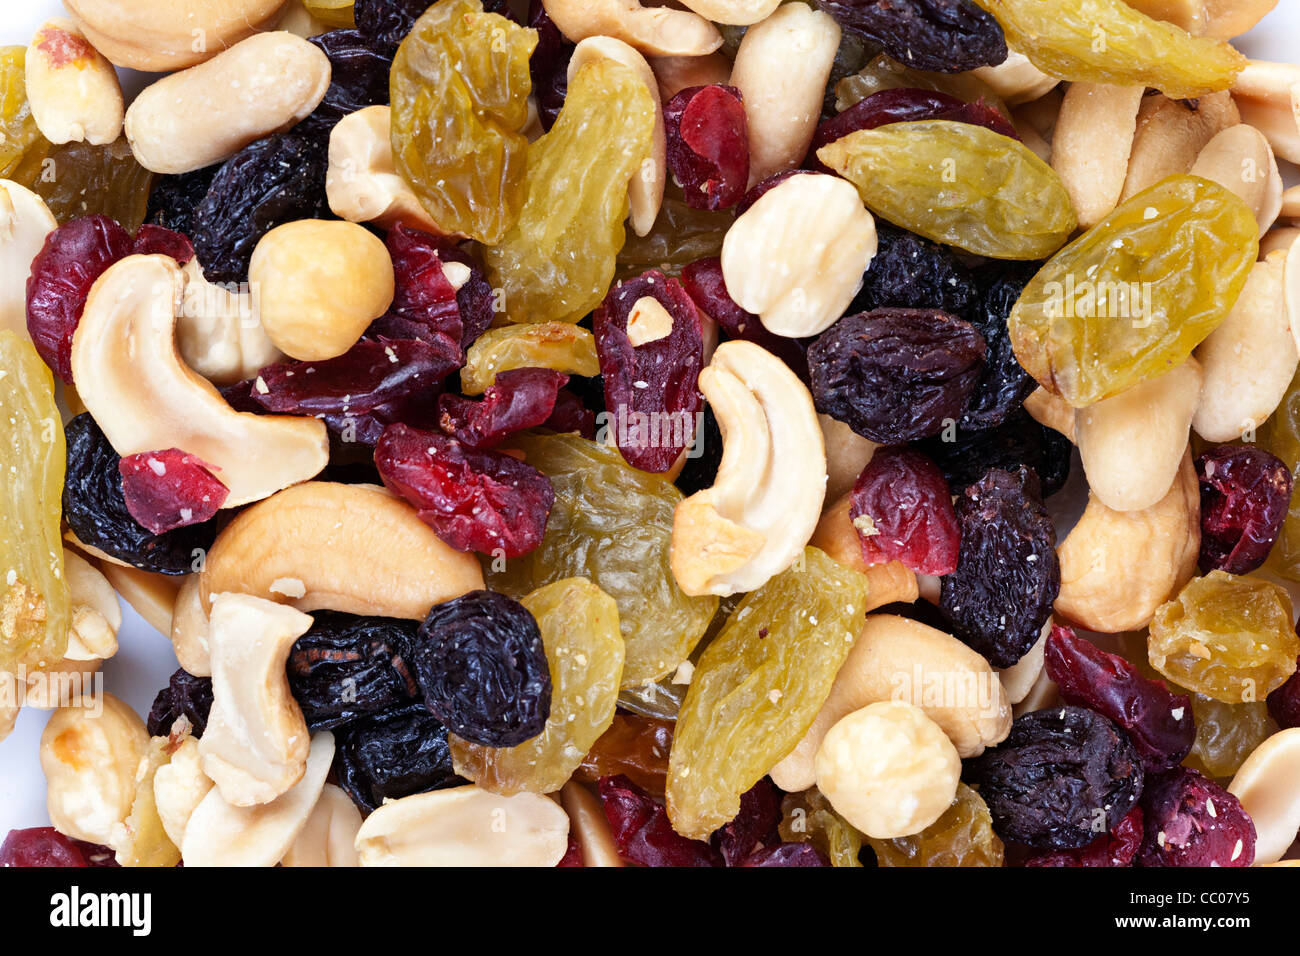 mixed nuts and fruit Stock Photo